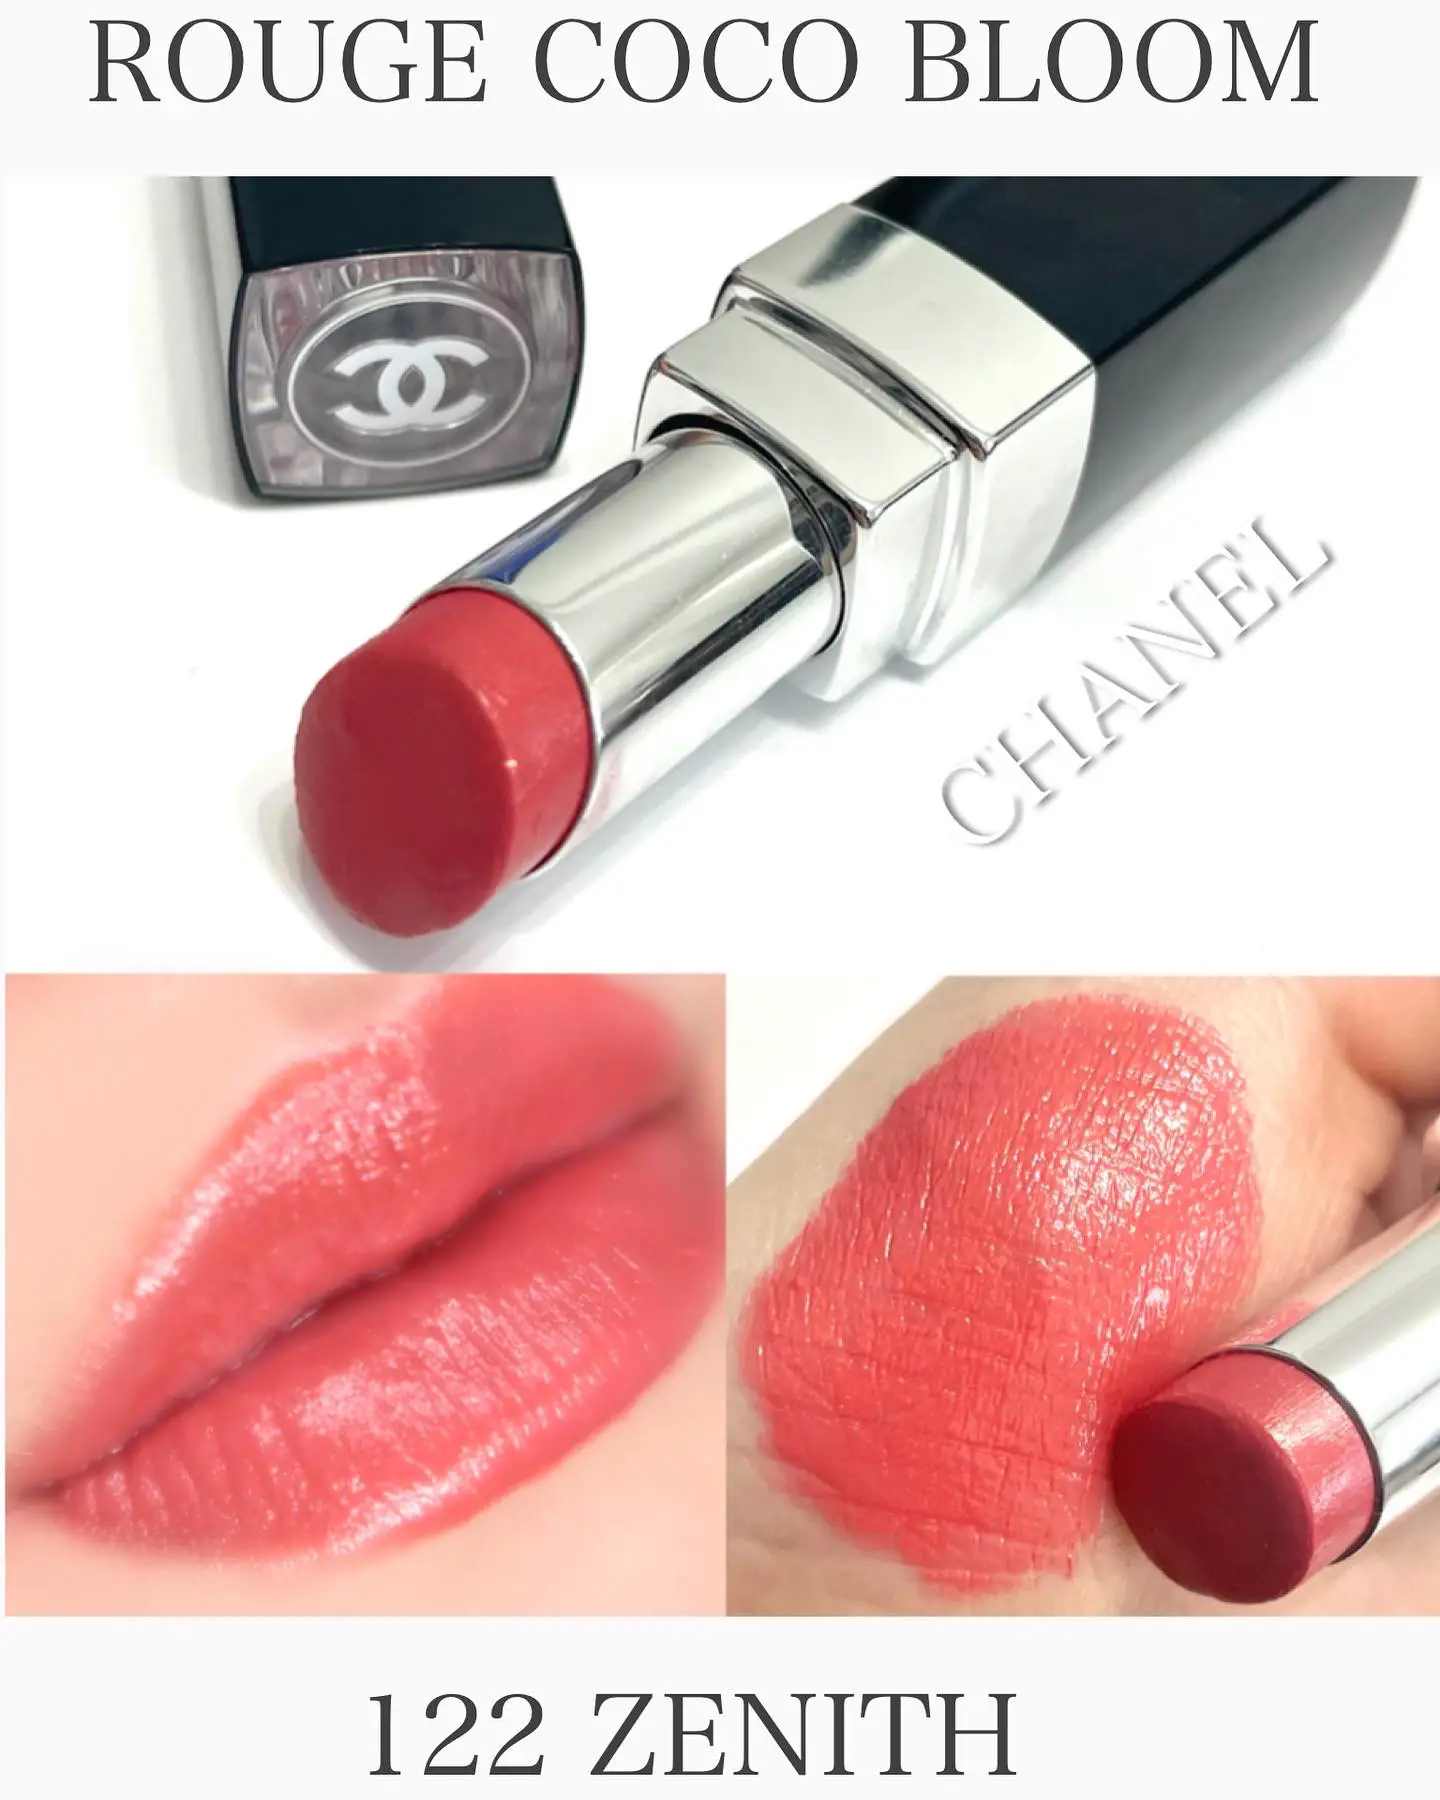 CHANEL 》 HAPPY CORAL LIP💄, Gallery posted by Maruco🦋